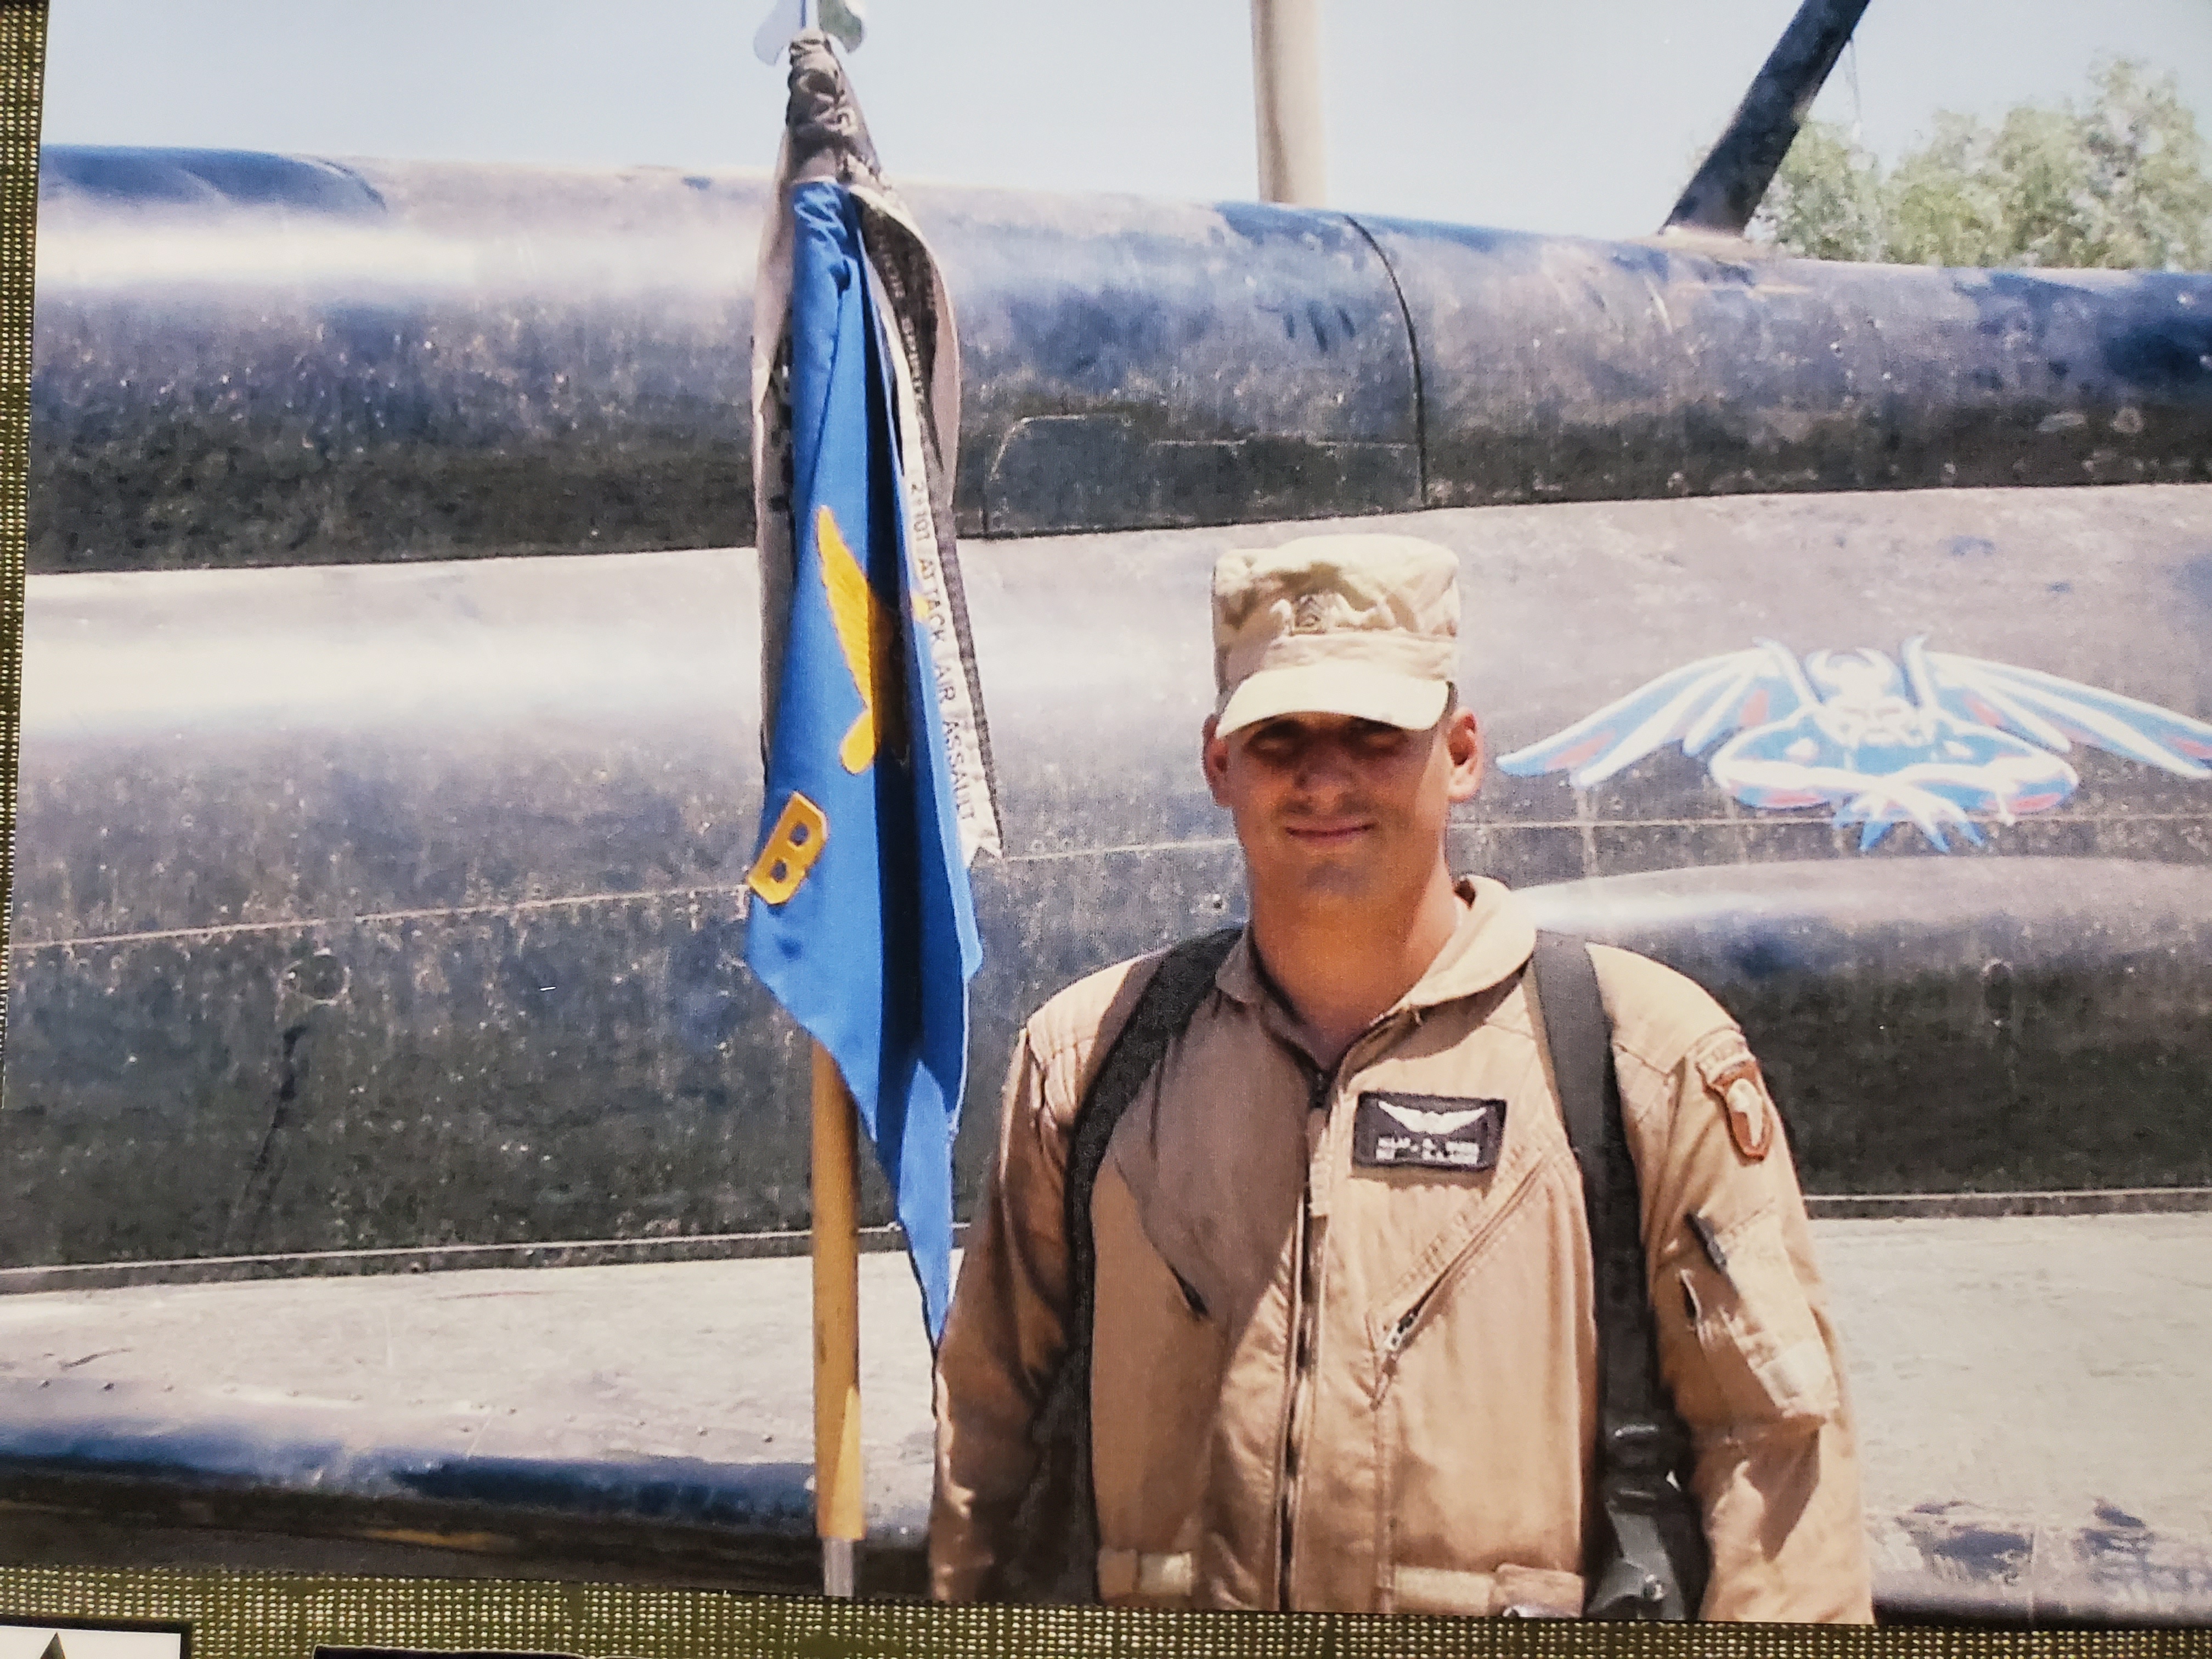 A military veteran in combat gear stands next to a military plane.